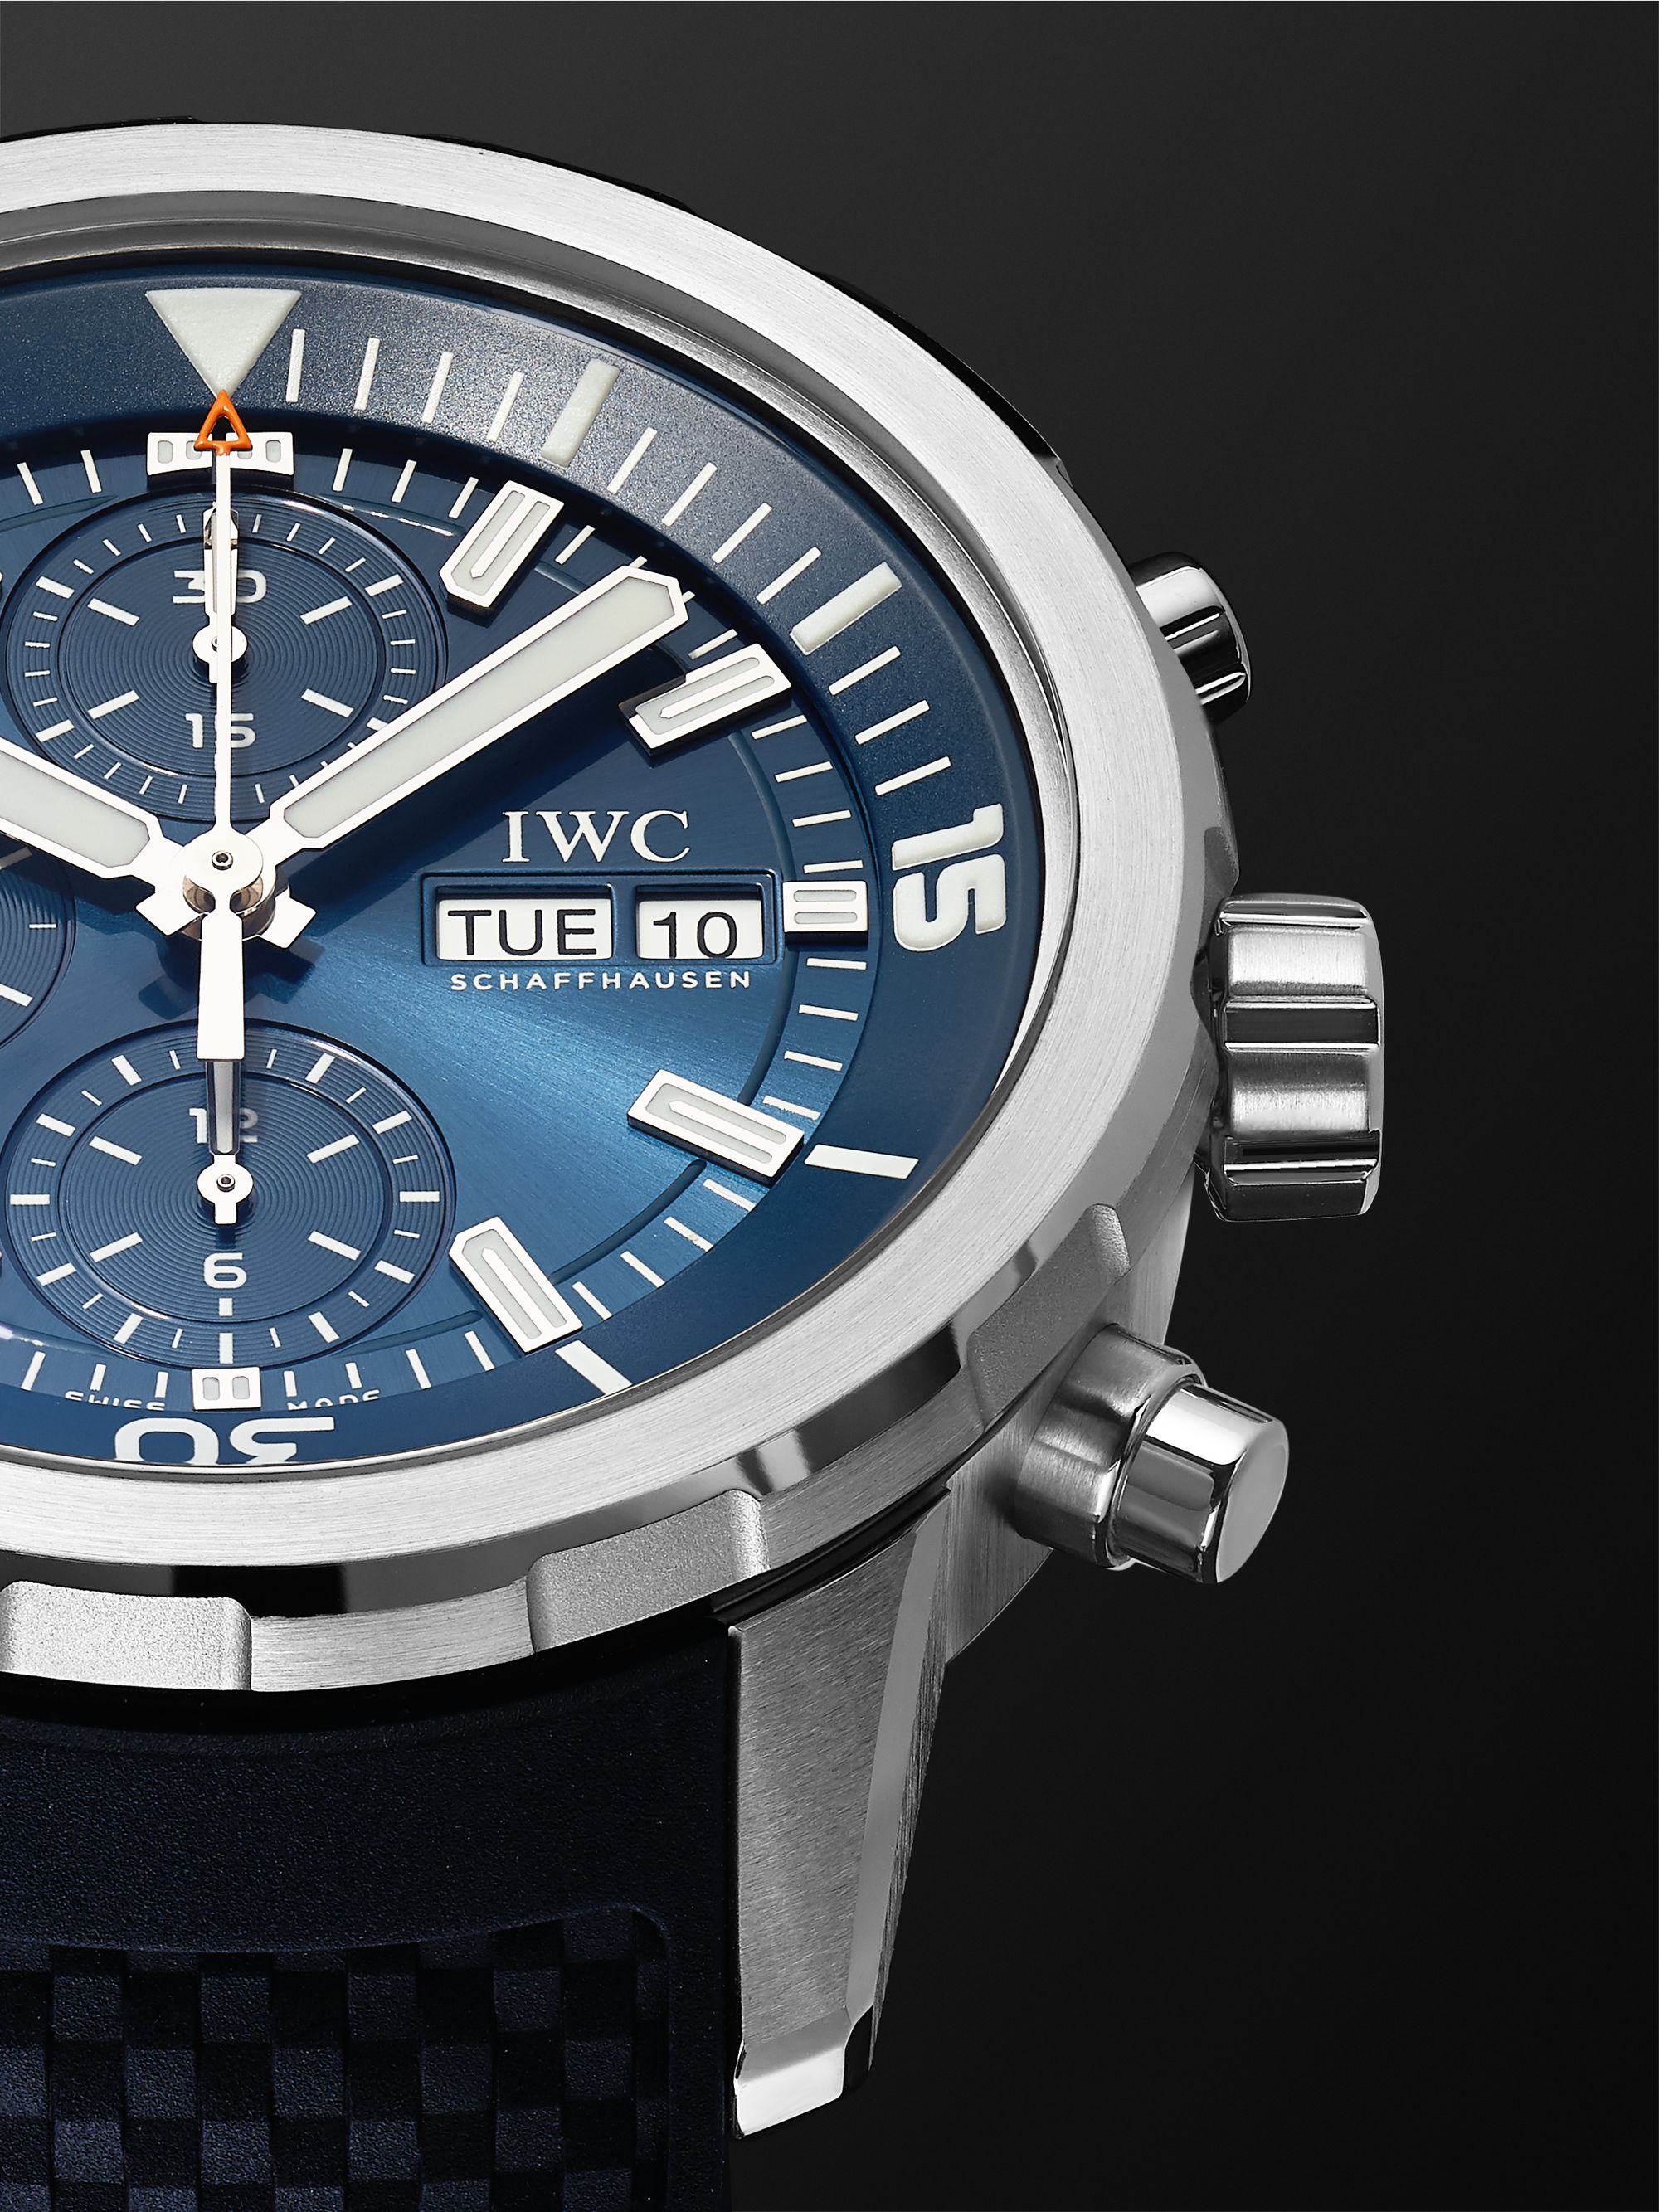 IWC SCHAFFHAUSEN Aquatimer Automatic Chronograph 44mm Stainless Steel and Rubber Watch, Ref. No. IW376806